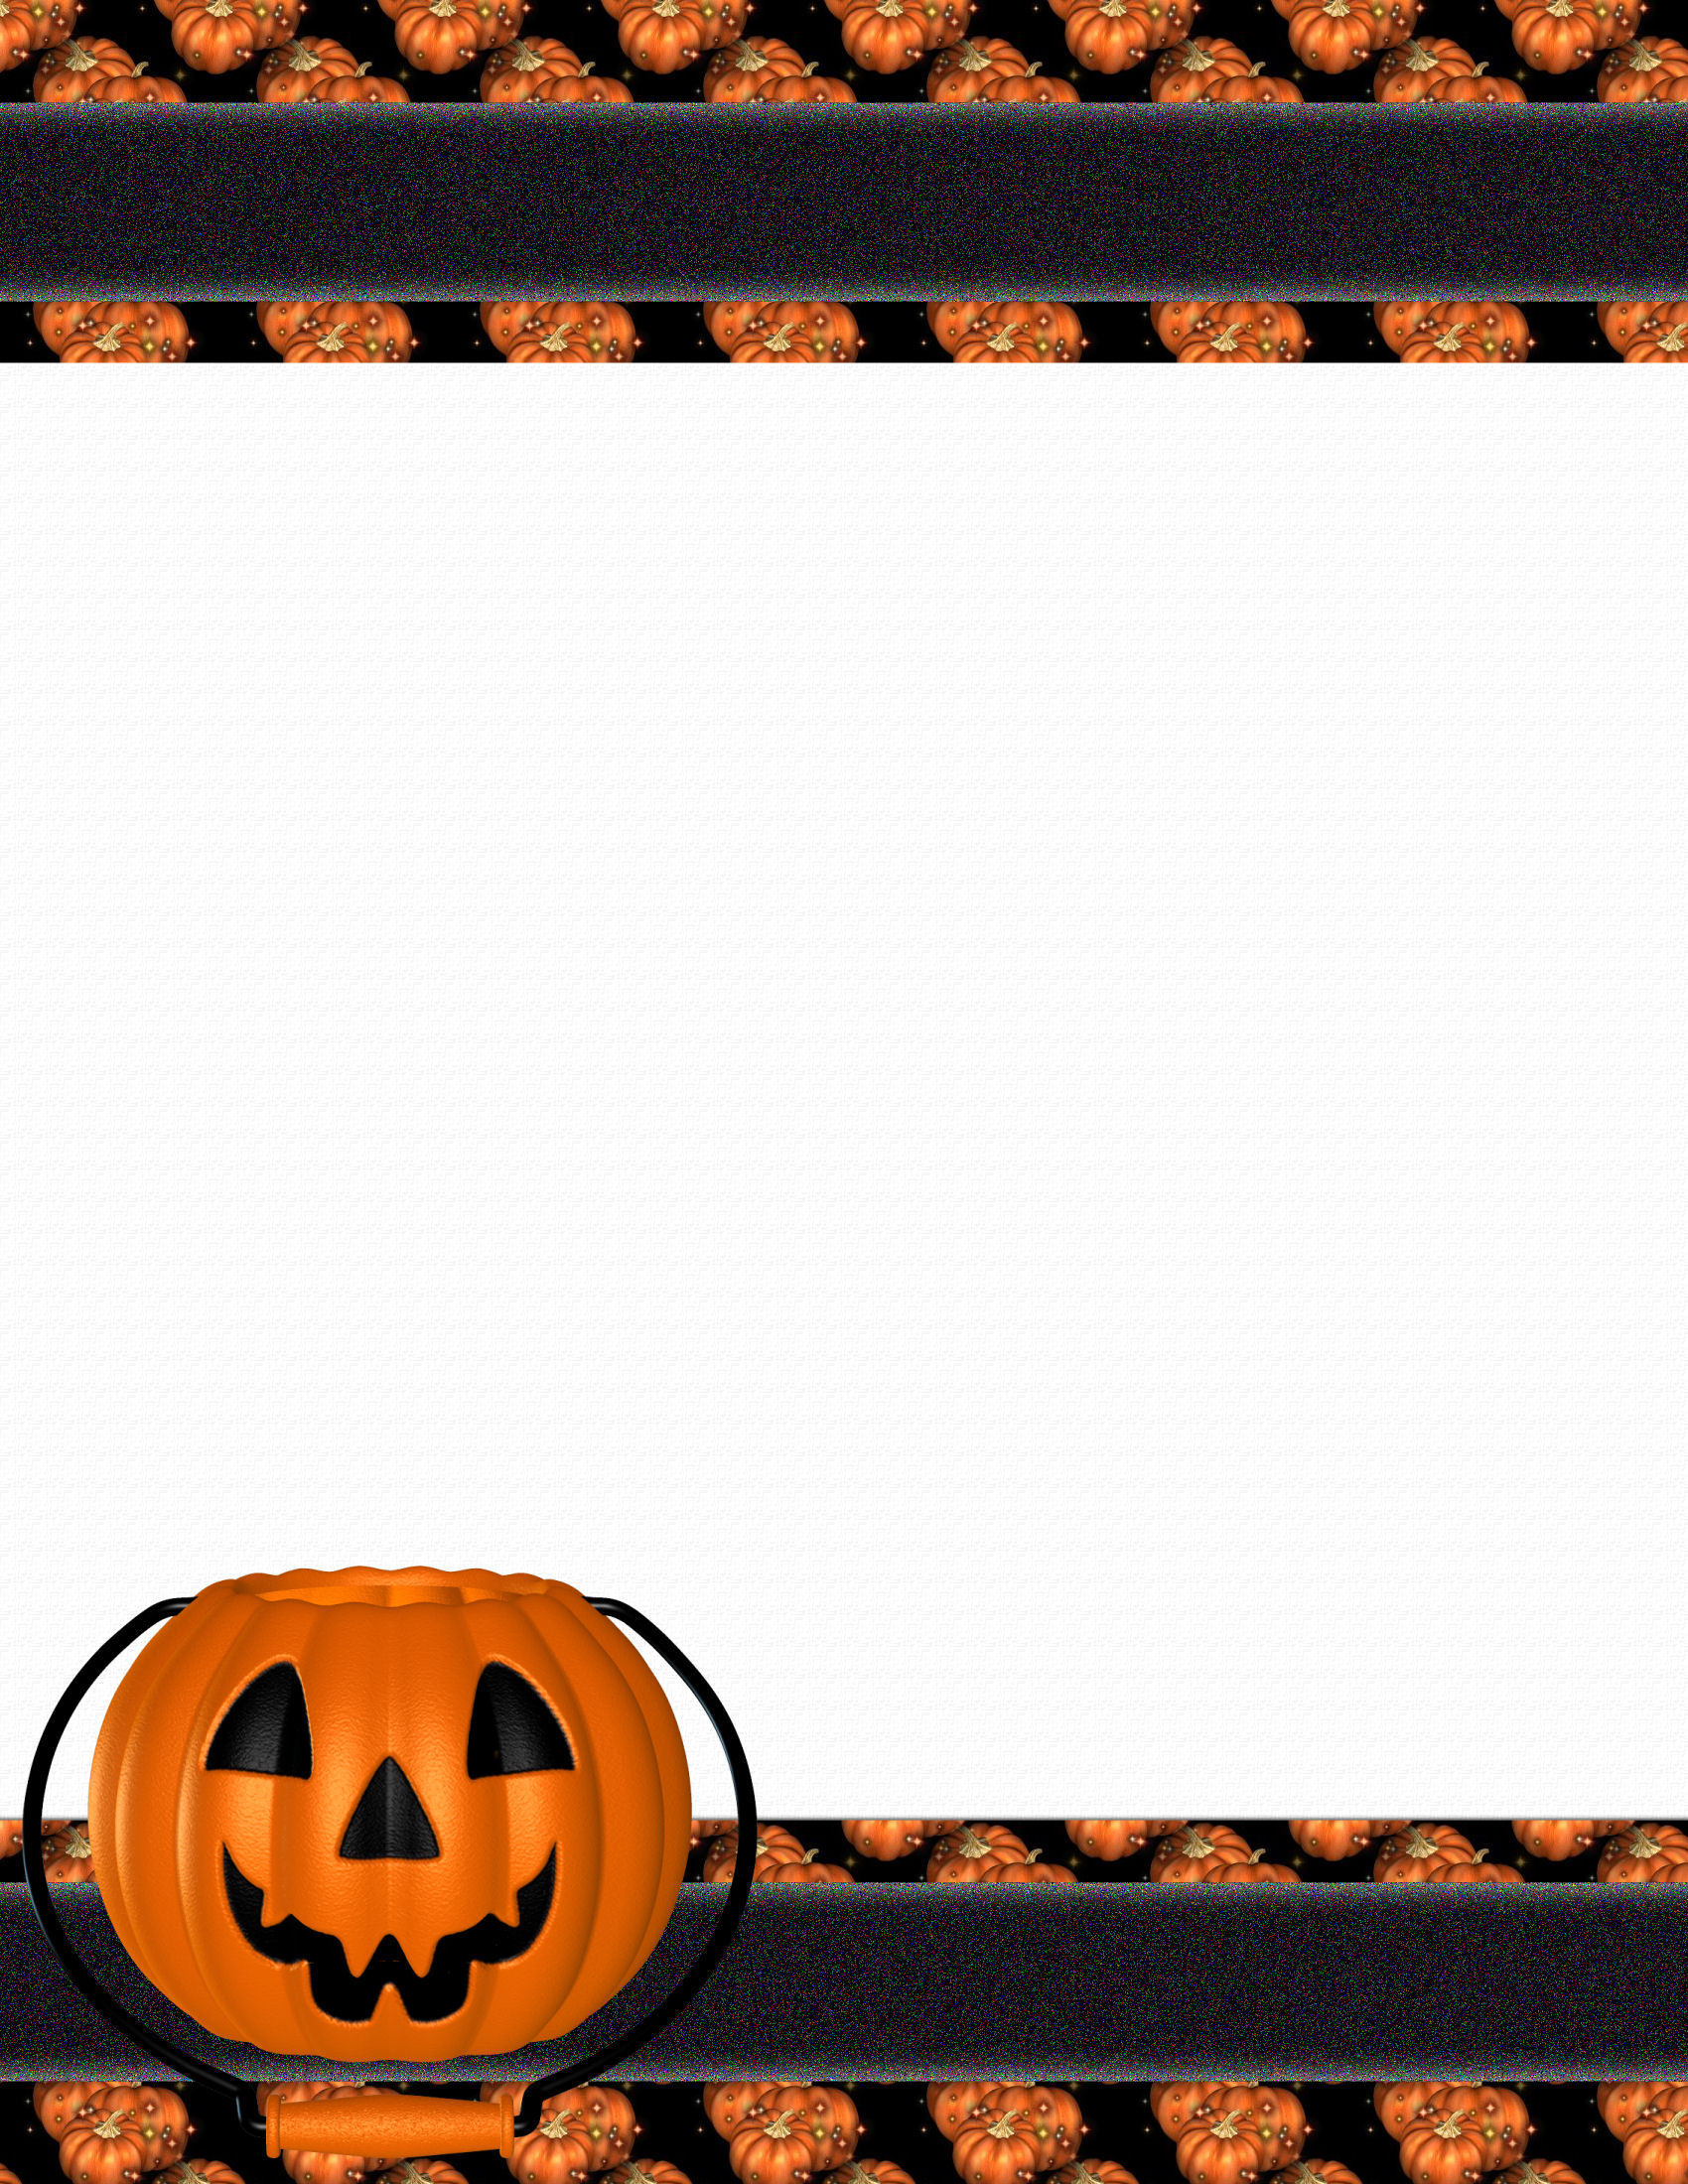 Halloween 2 FREE-Stationery.com Template Downloads